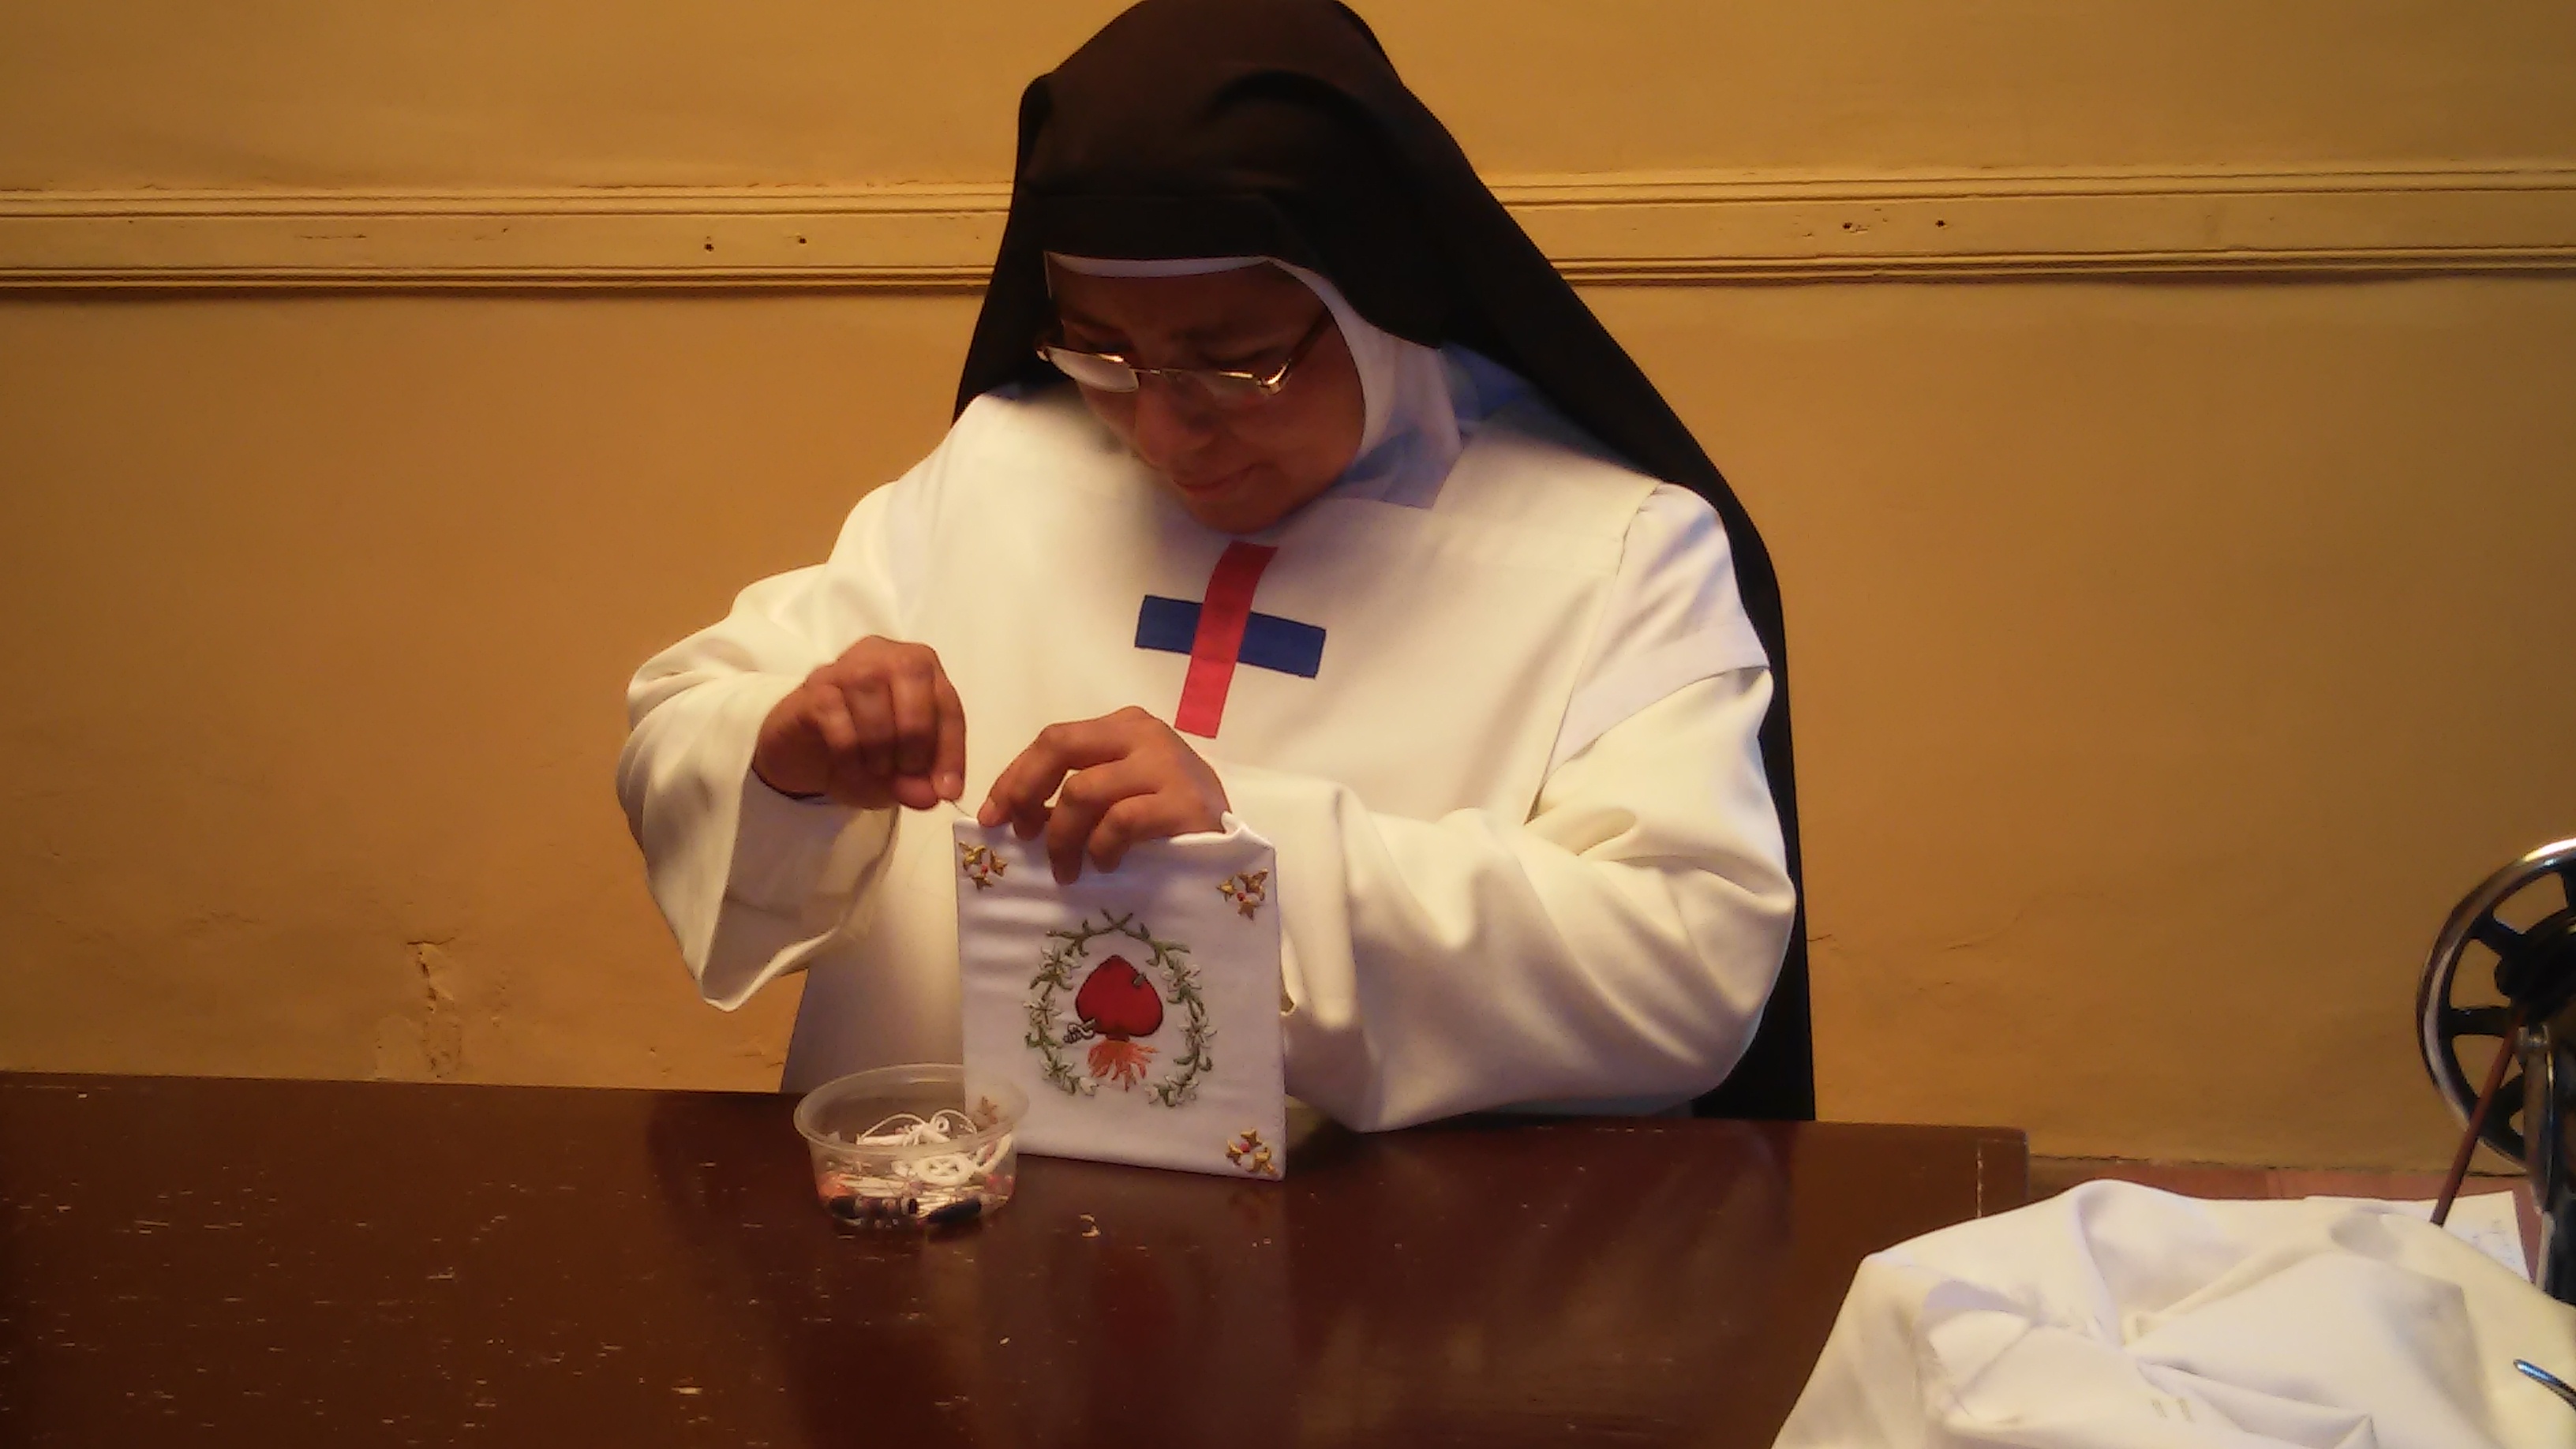 An Embroidery Machine for Contemplative Sisters in Peru